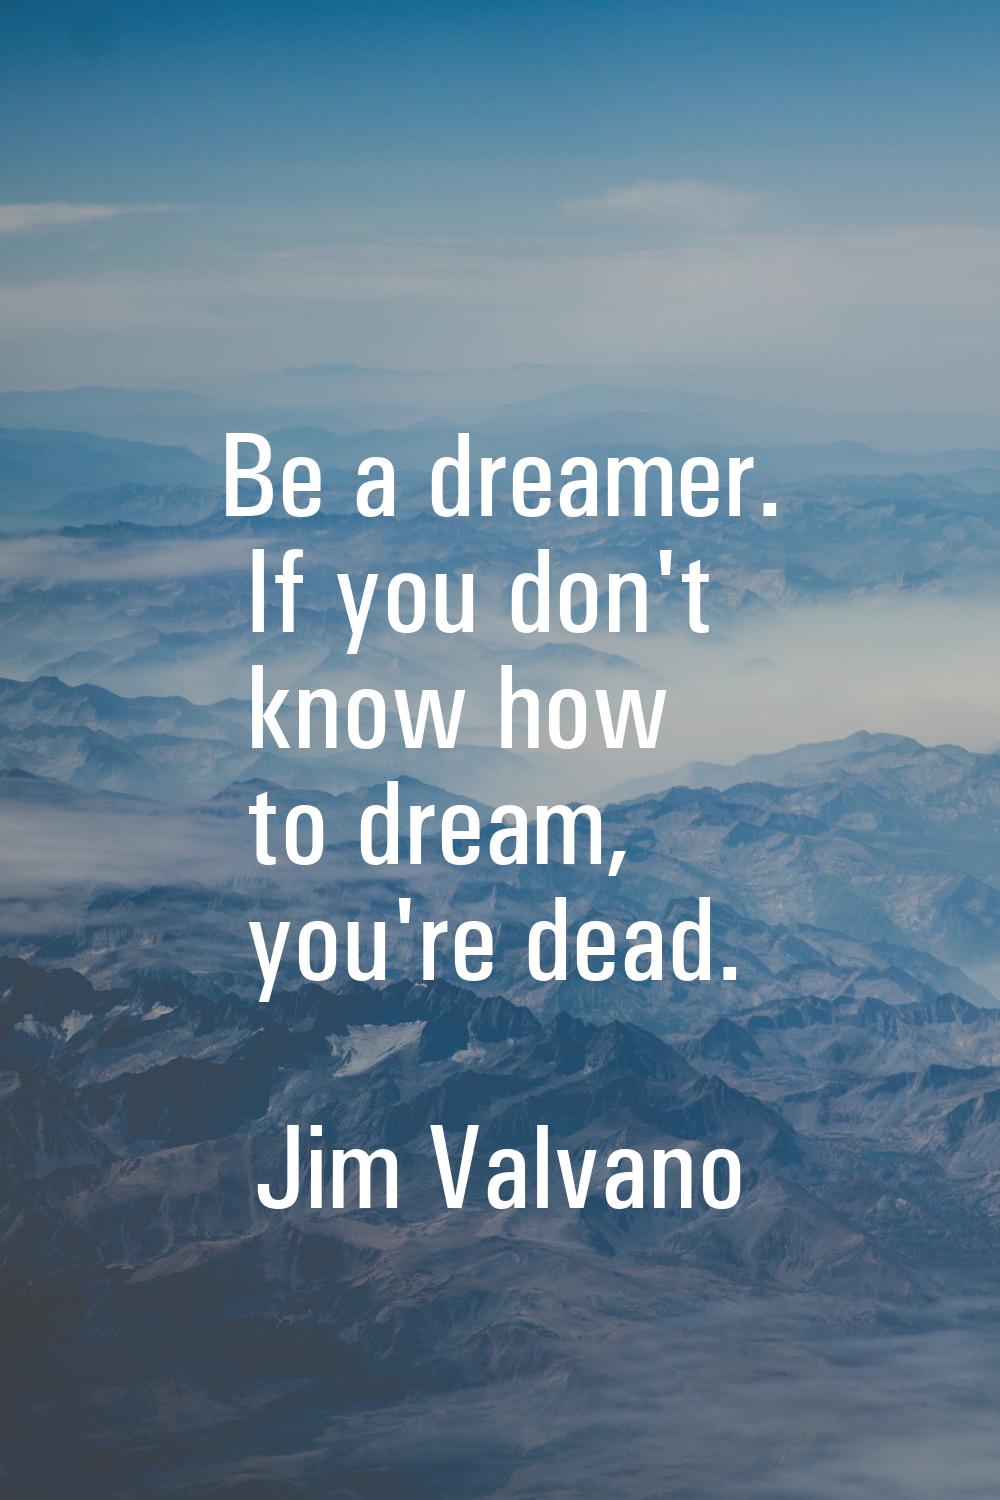 Be a dreamer. If you don't know how to dream, you're dead.